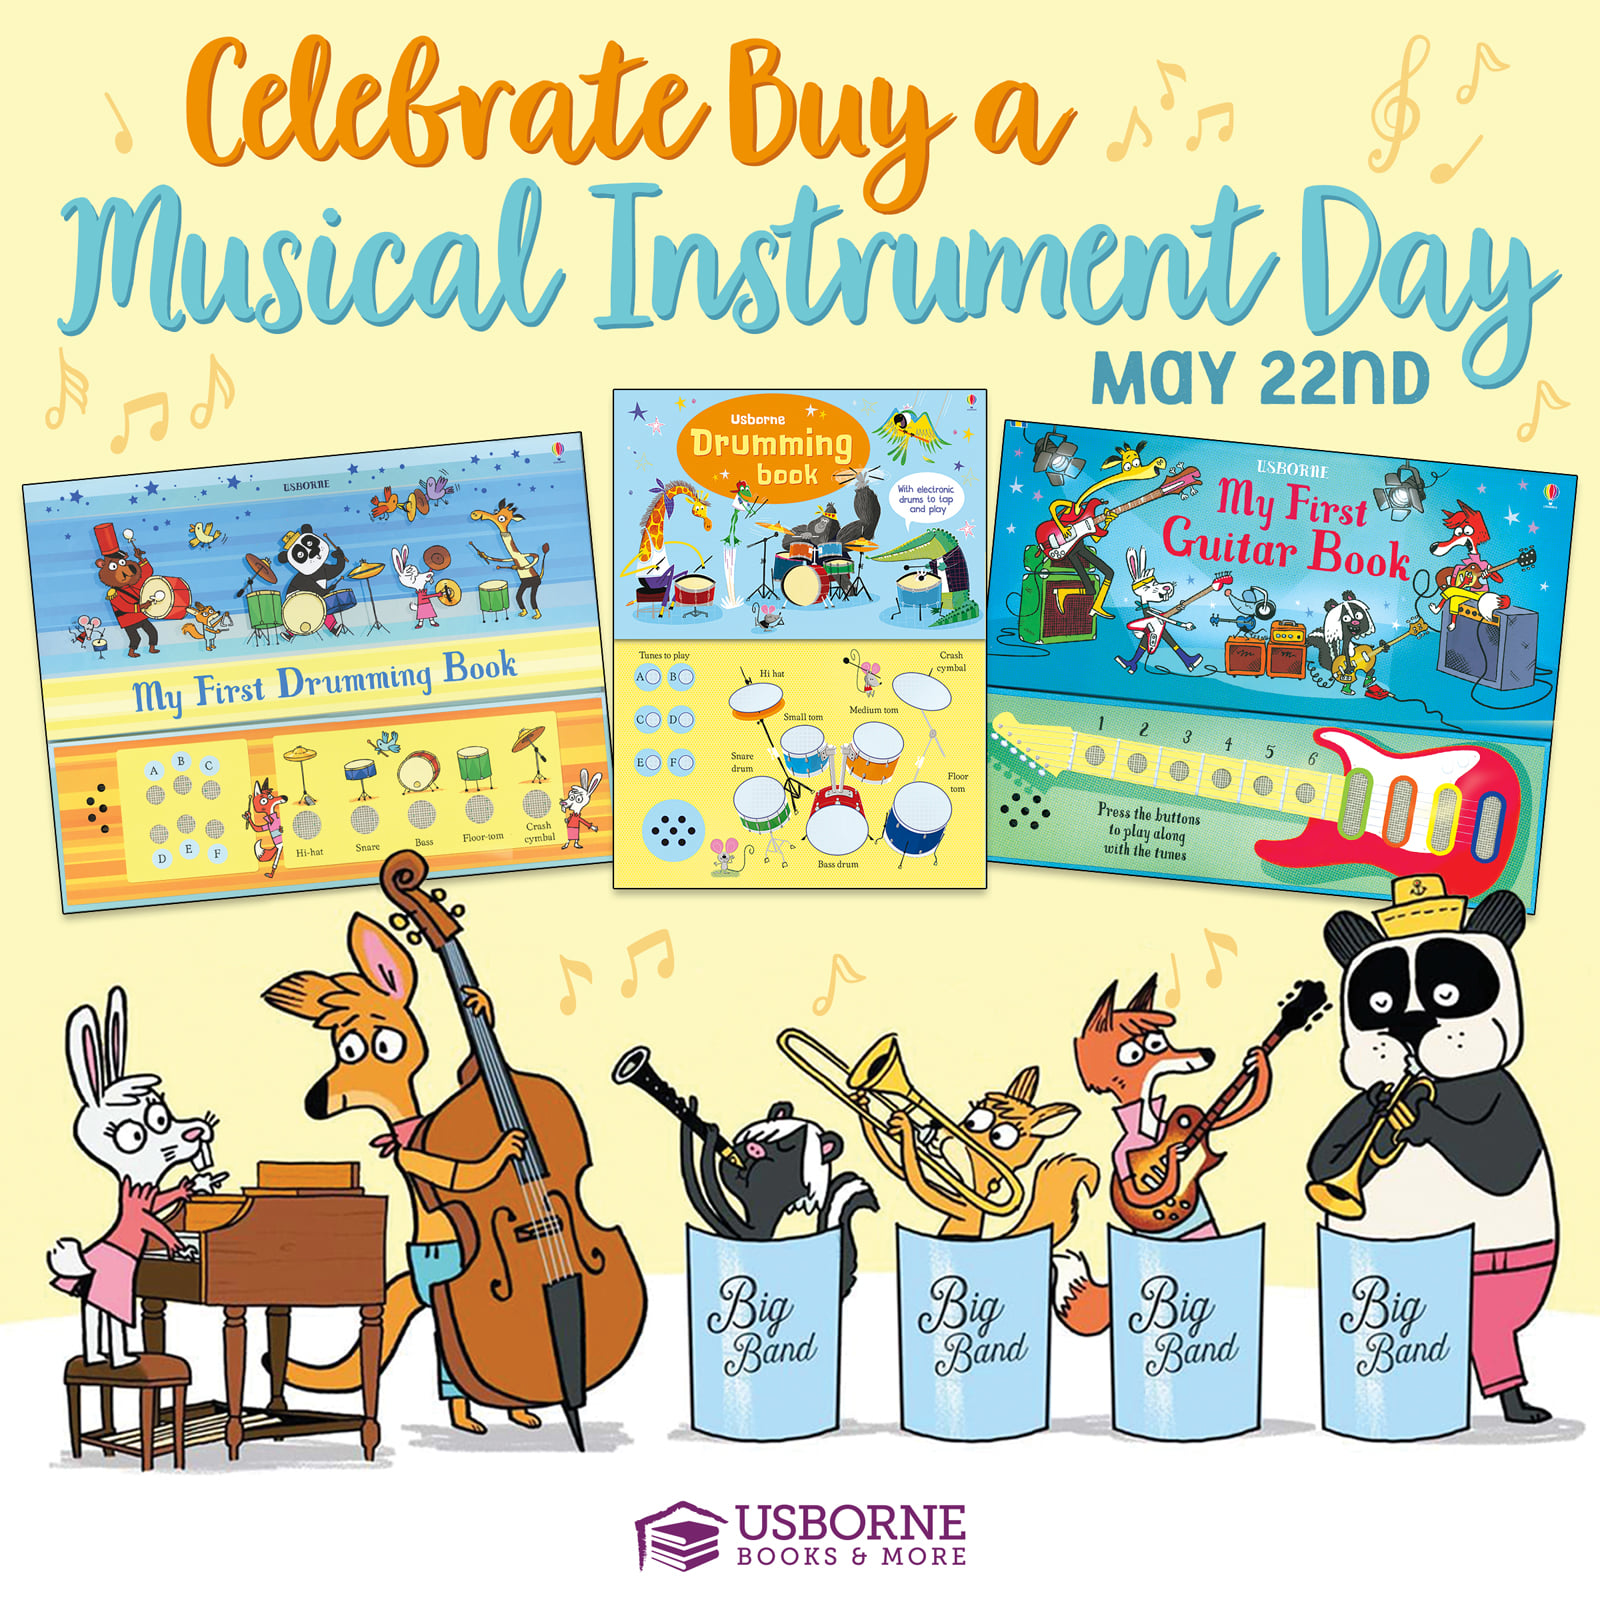 Buy a Musical Instrument Day - May 22